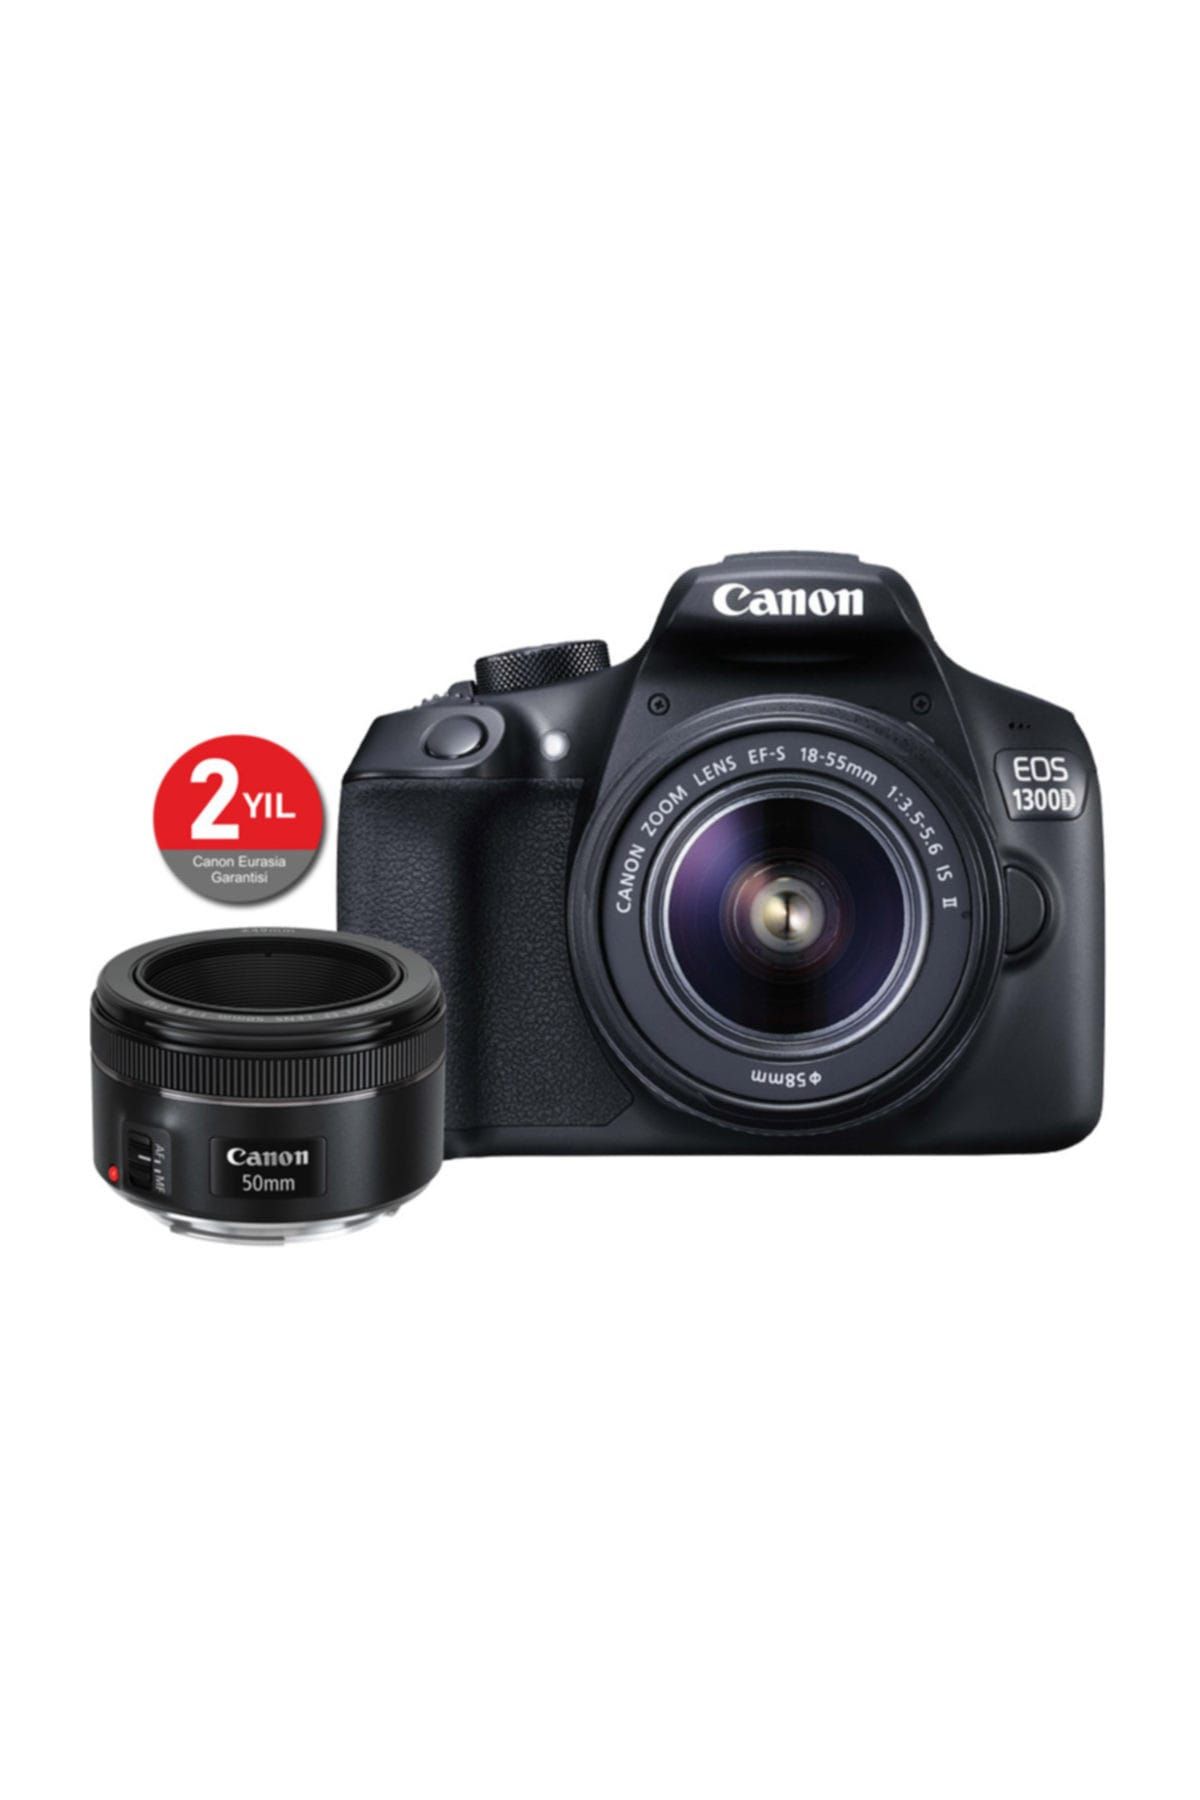 Canon EOS 1300D 18-55mm + 50mm IS STM Kit